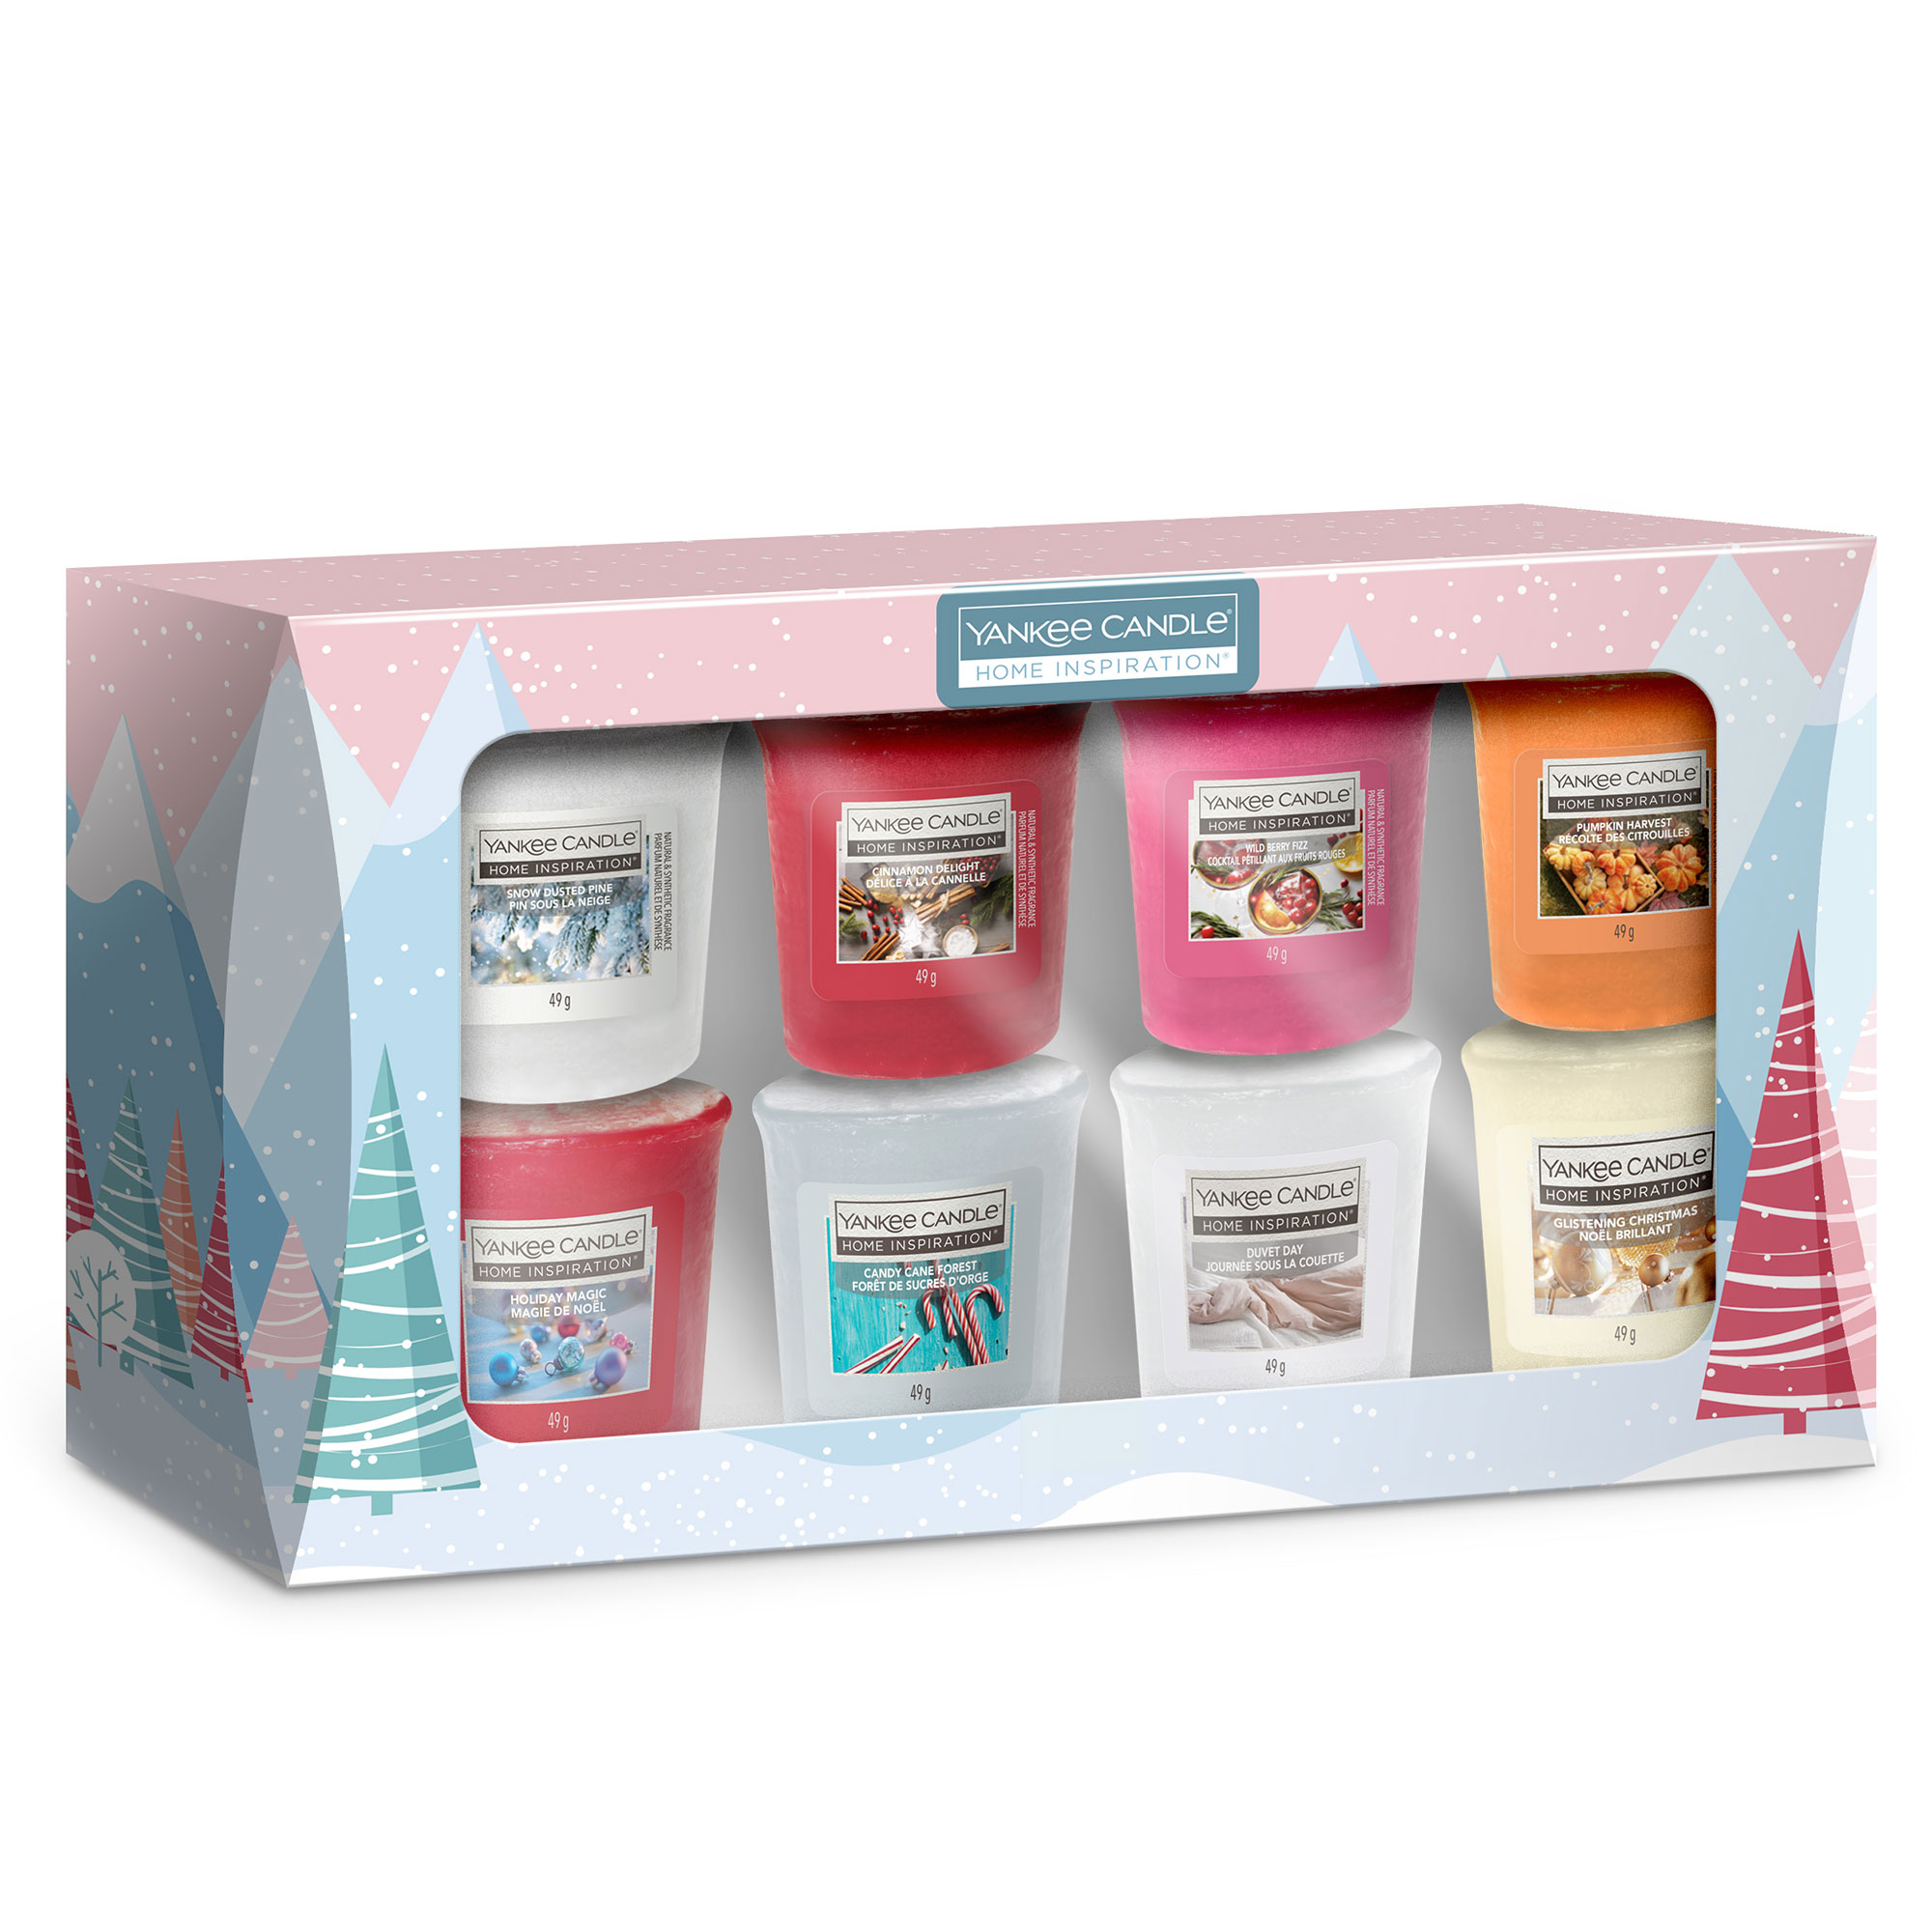 Yankee Candle Home Inspiration Votive Christmas Gift Set of 8 Candles